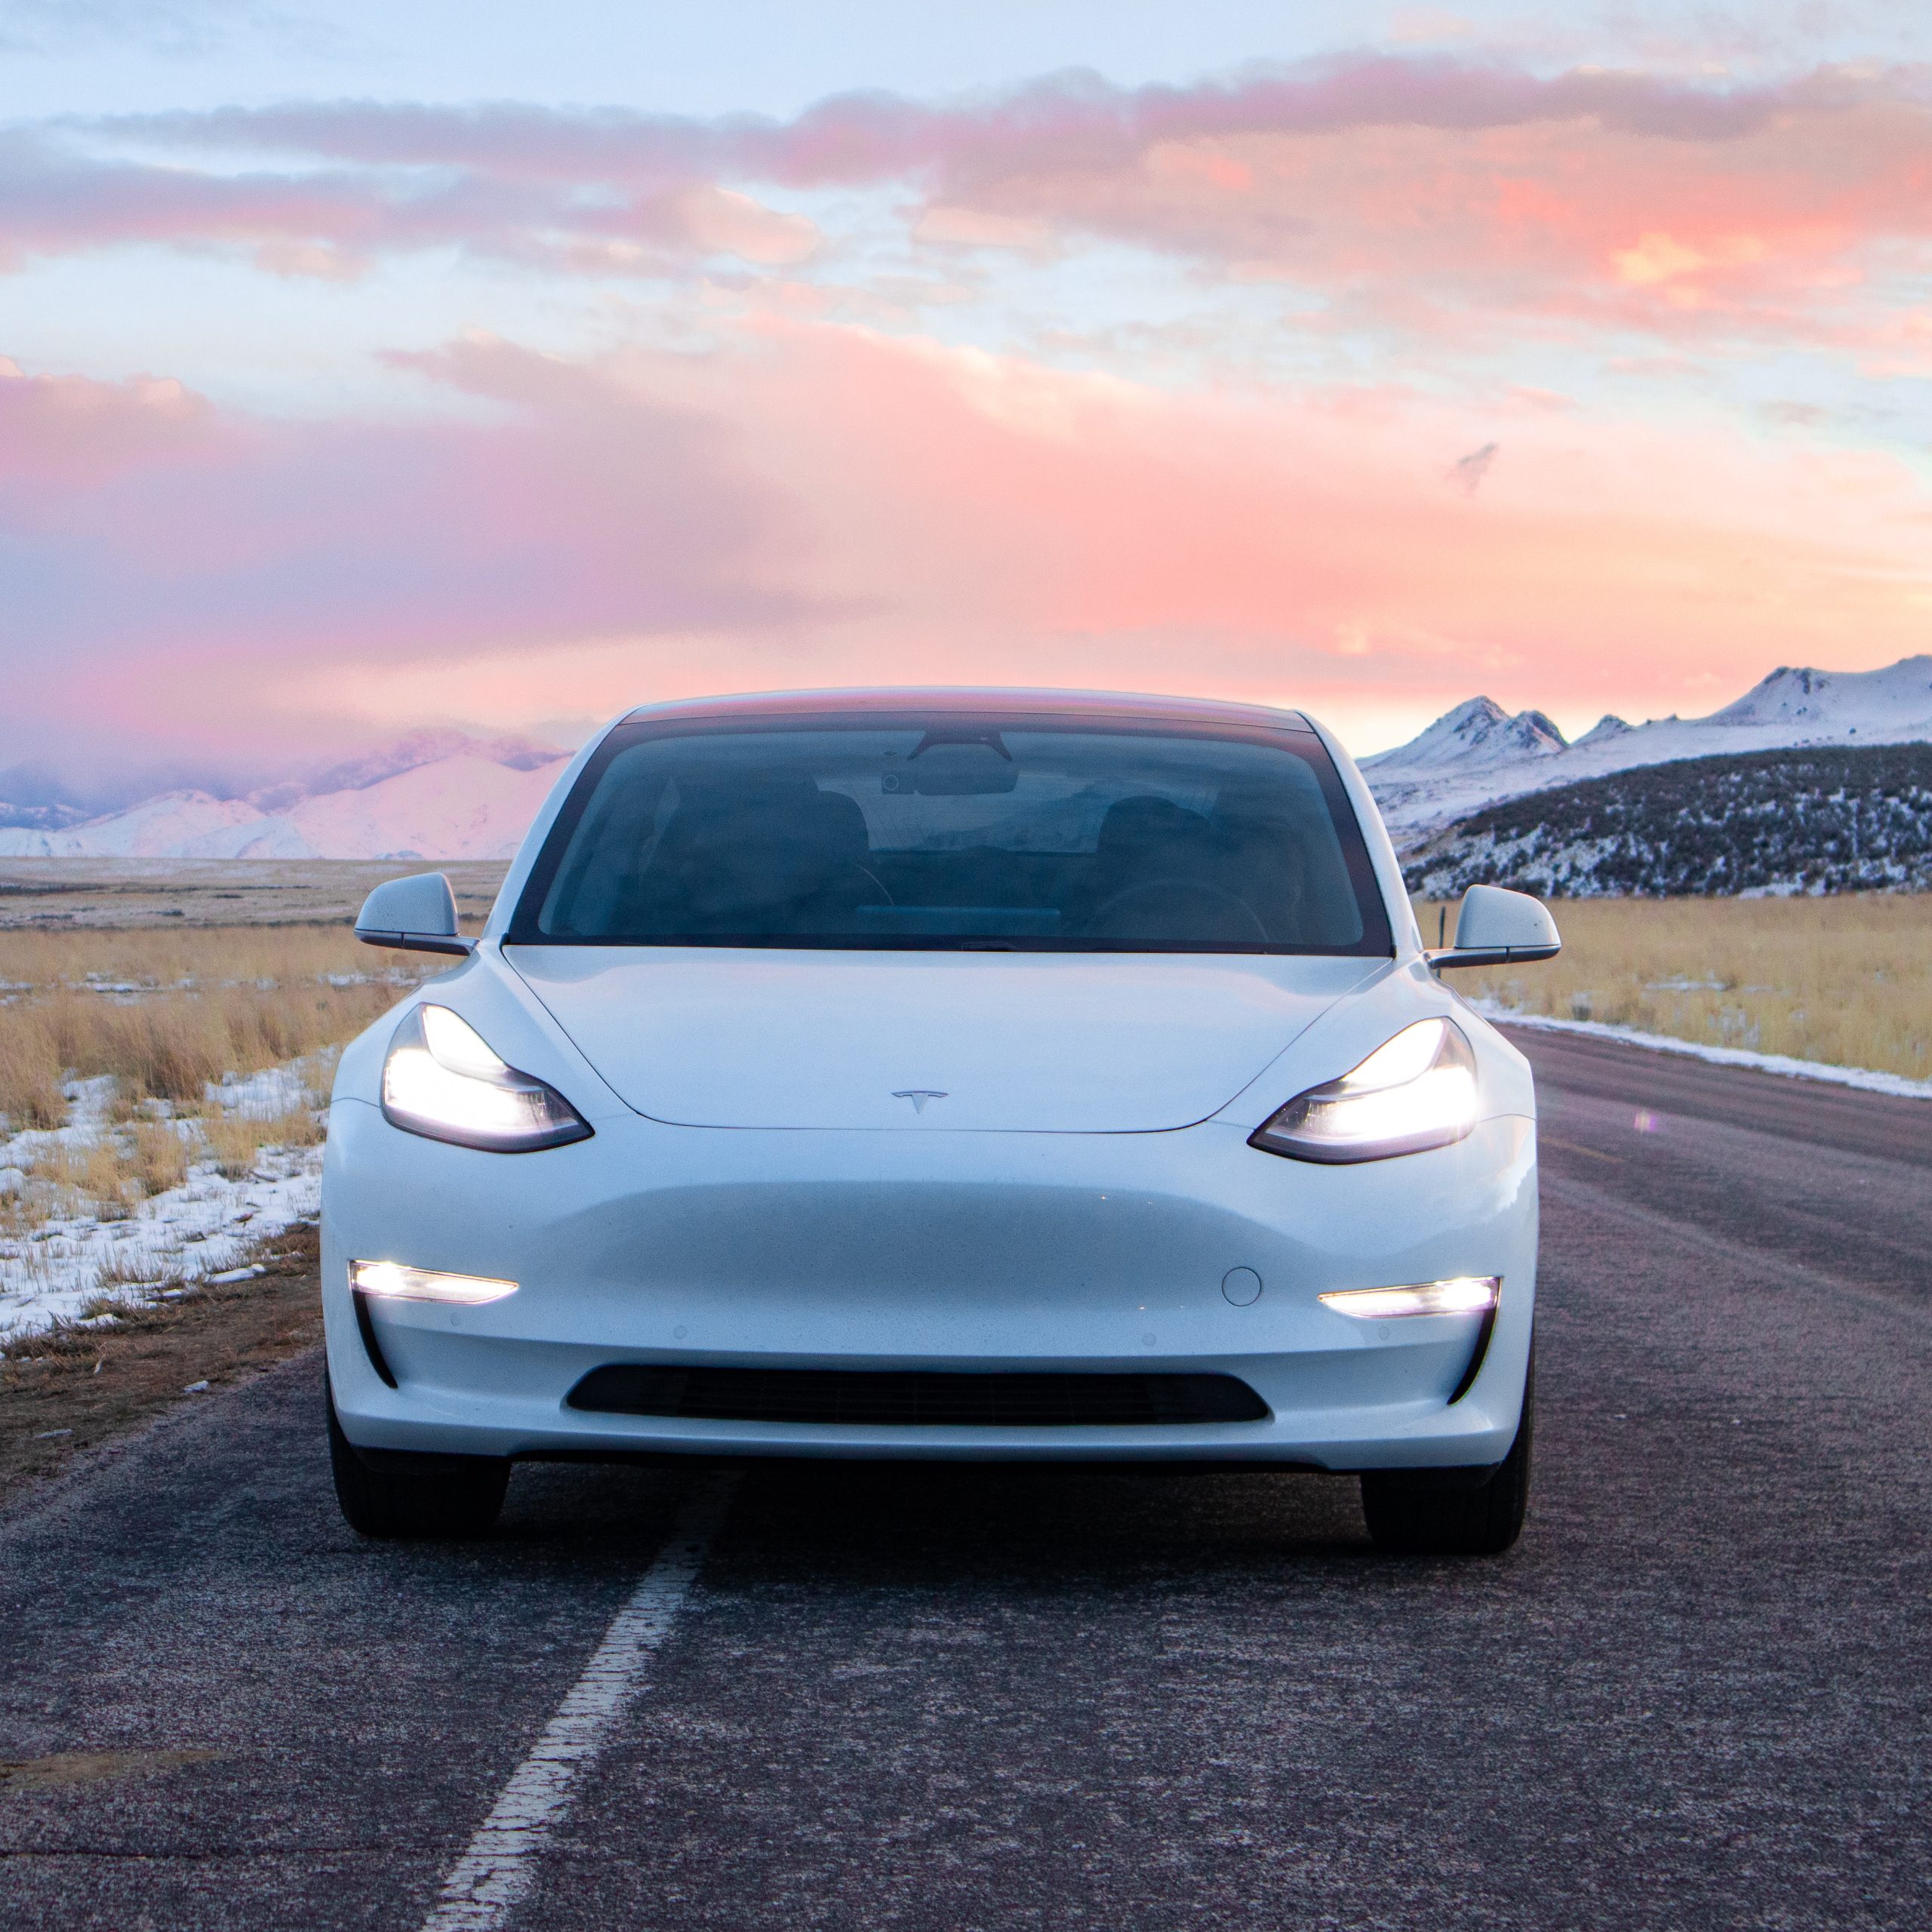 Tesla's Market Share Continues to Drop Across U.S. Residential Rankings - Tesla, Inc.